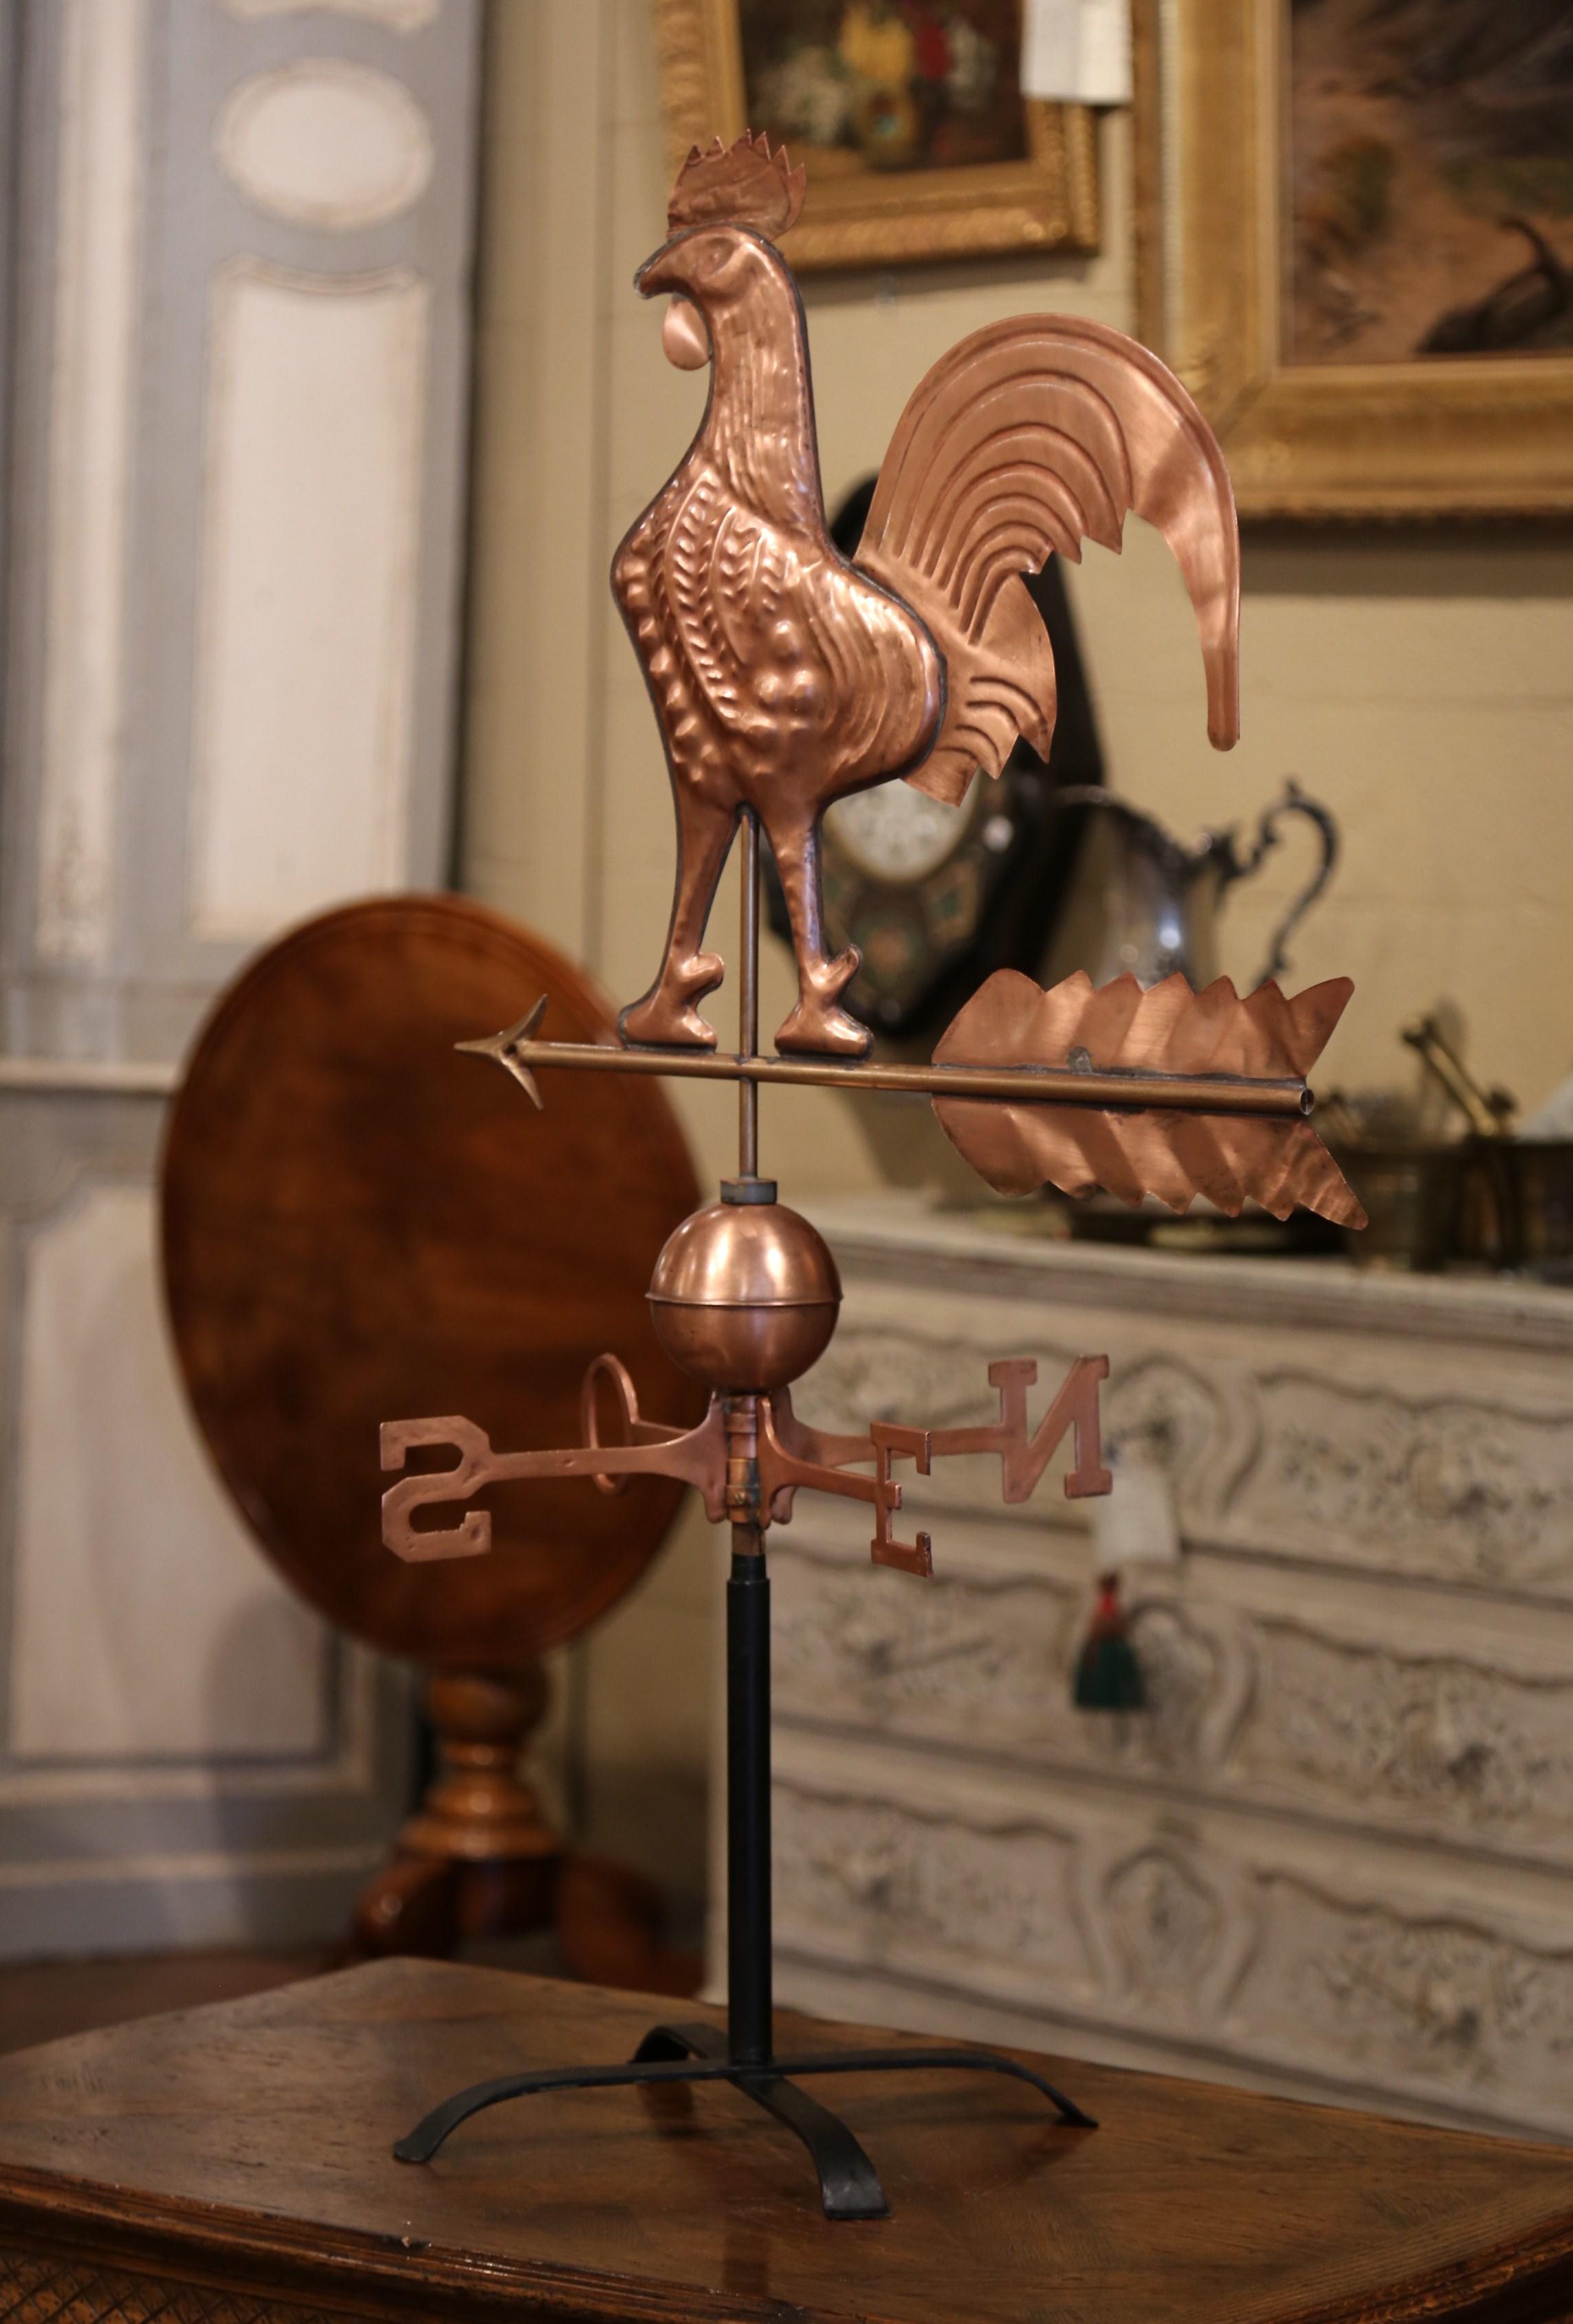 This elegant antique weather vane was created in Normandy, France, circa 1860. The traditional copper sculpture features a classic swivel French chanticleer rooster standing on an arrow; below, the four points of the compass swivel according to wind